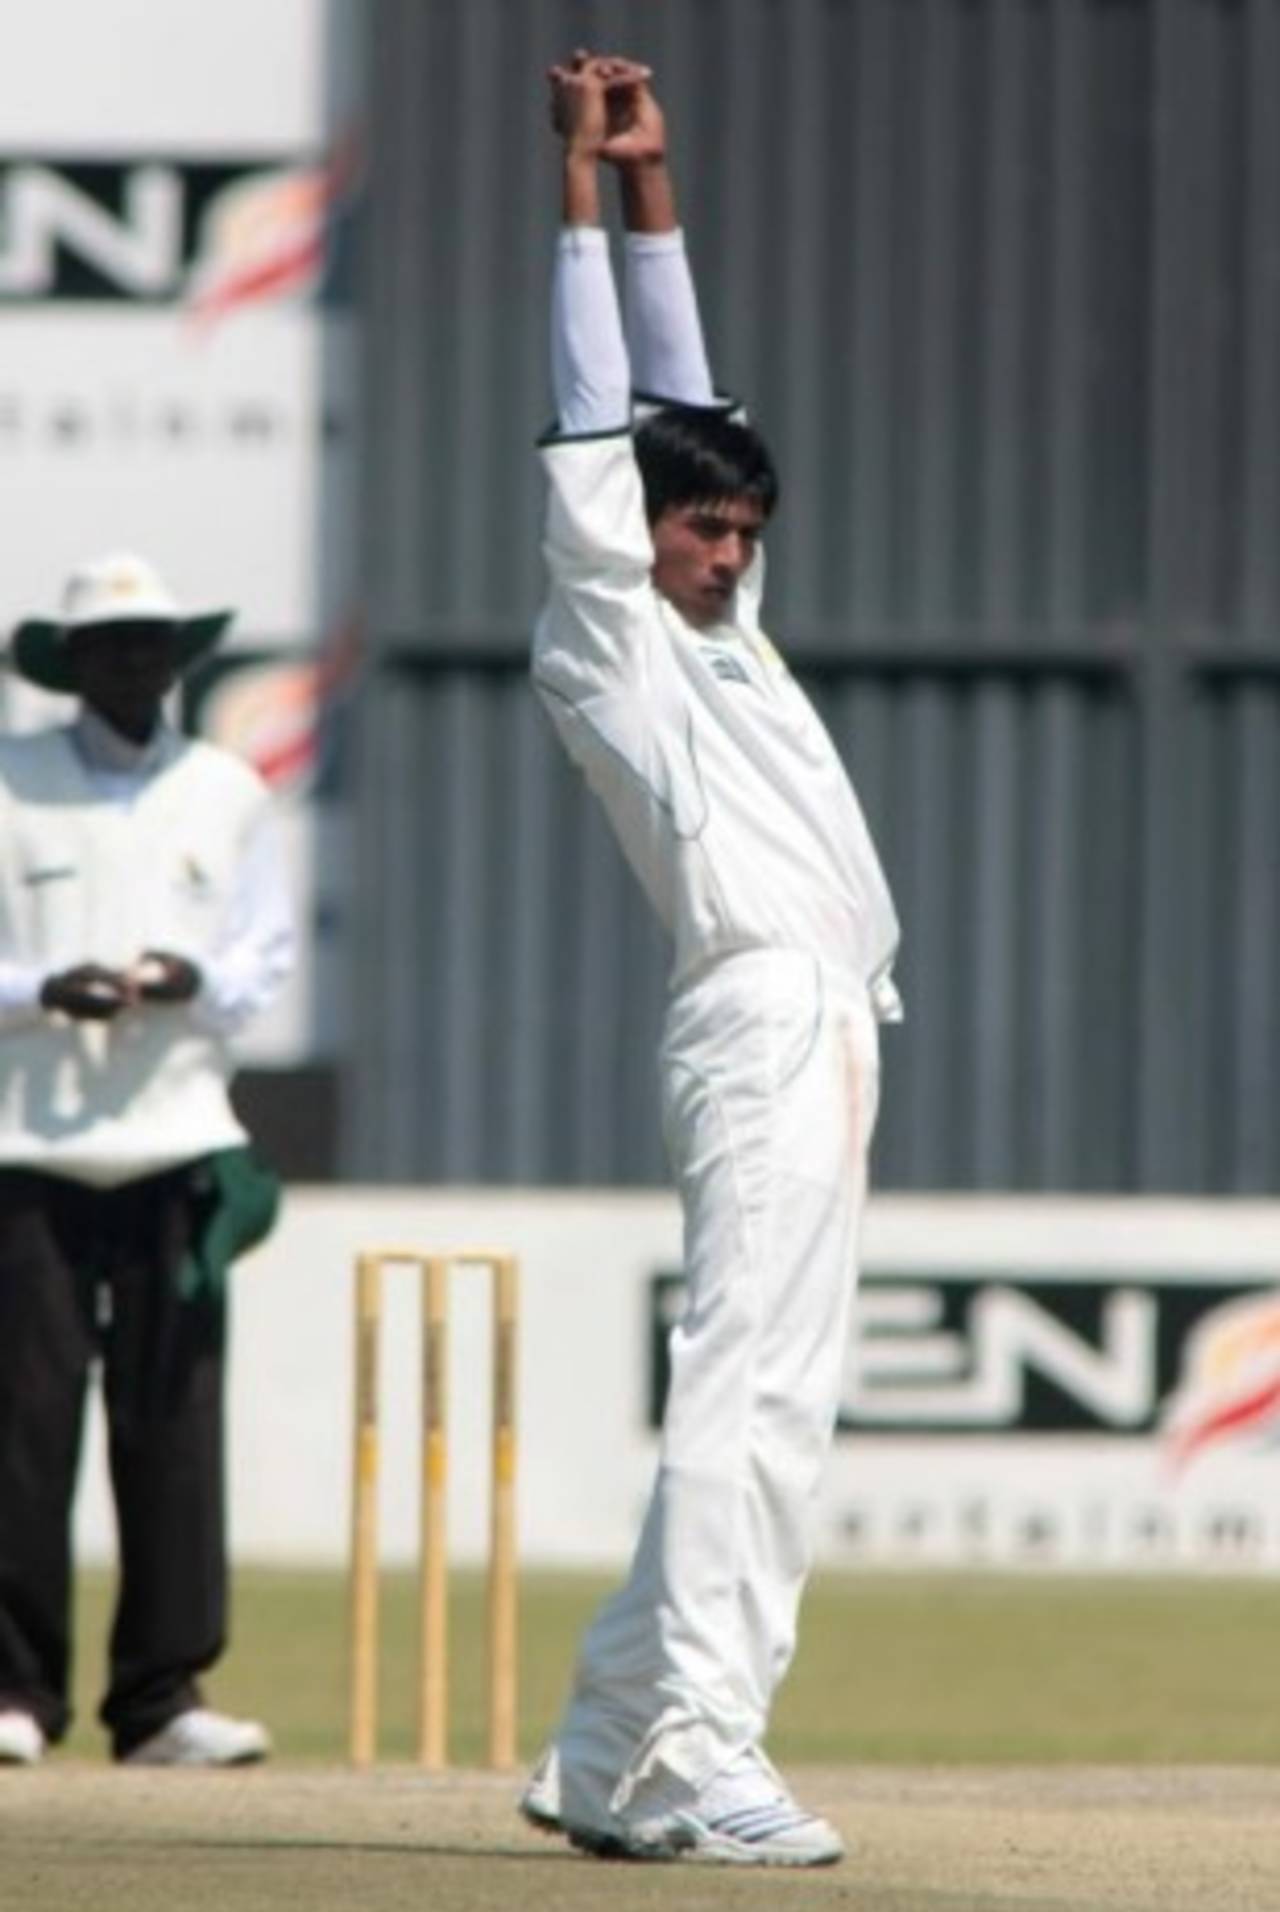 Mohammad Aamer stretches after completing an over, Zimbabwe Board XI v Pakistan National Cricket Academy, third day, Harare, August 25, 2008

